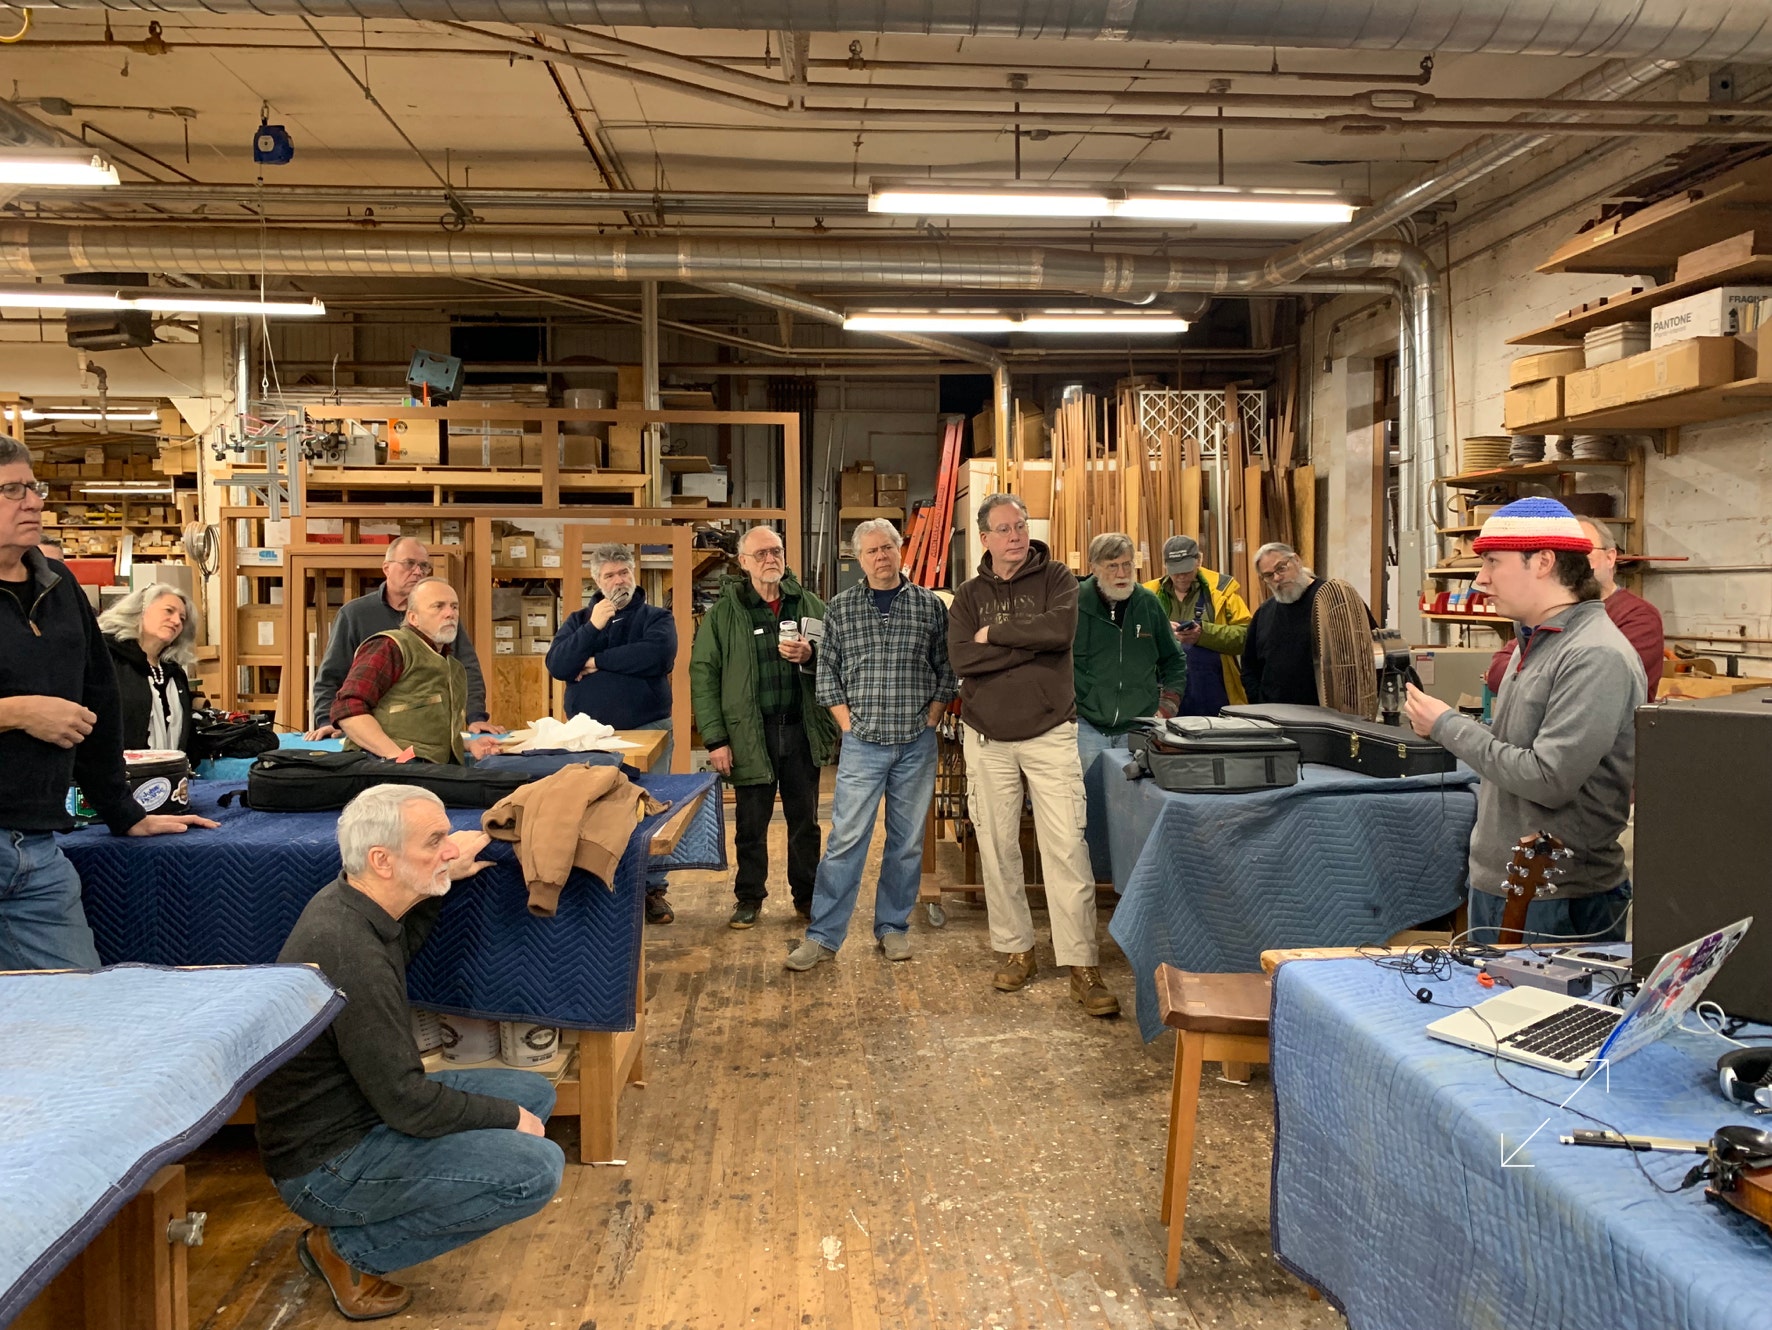 Photo of Brennish Thomson leading a workshop on acoustic instrument amplification using "Your Heaven" equipment, in Somerville, Massachussets.